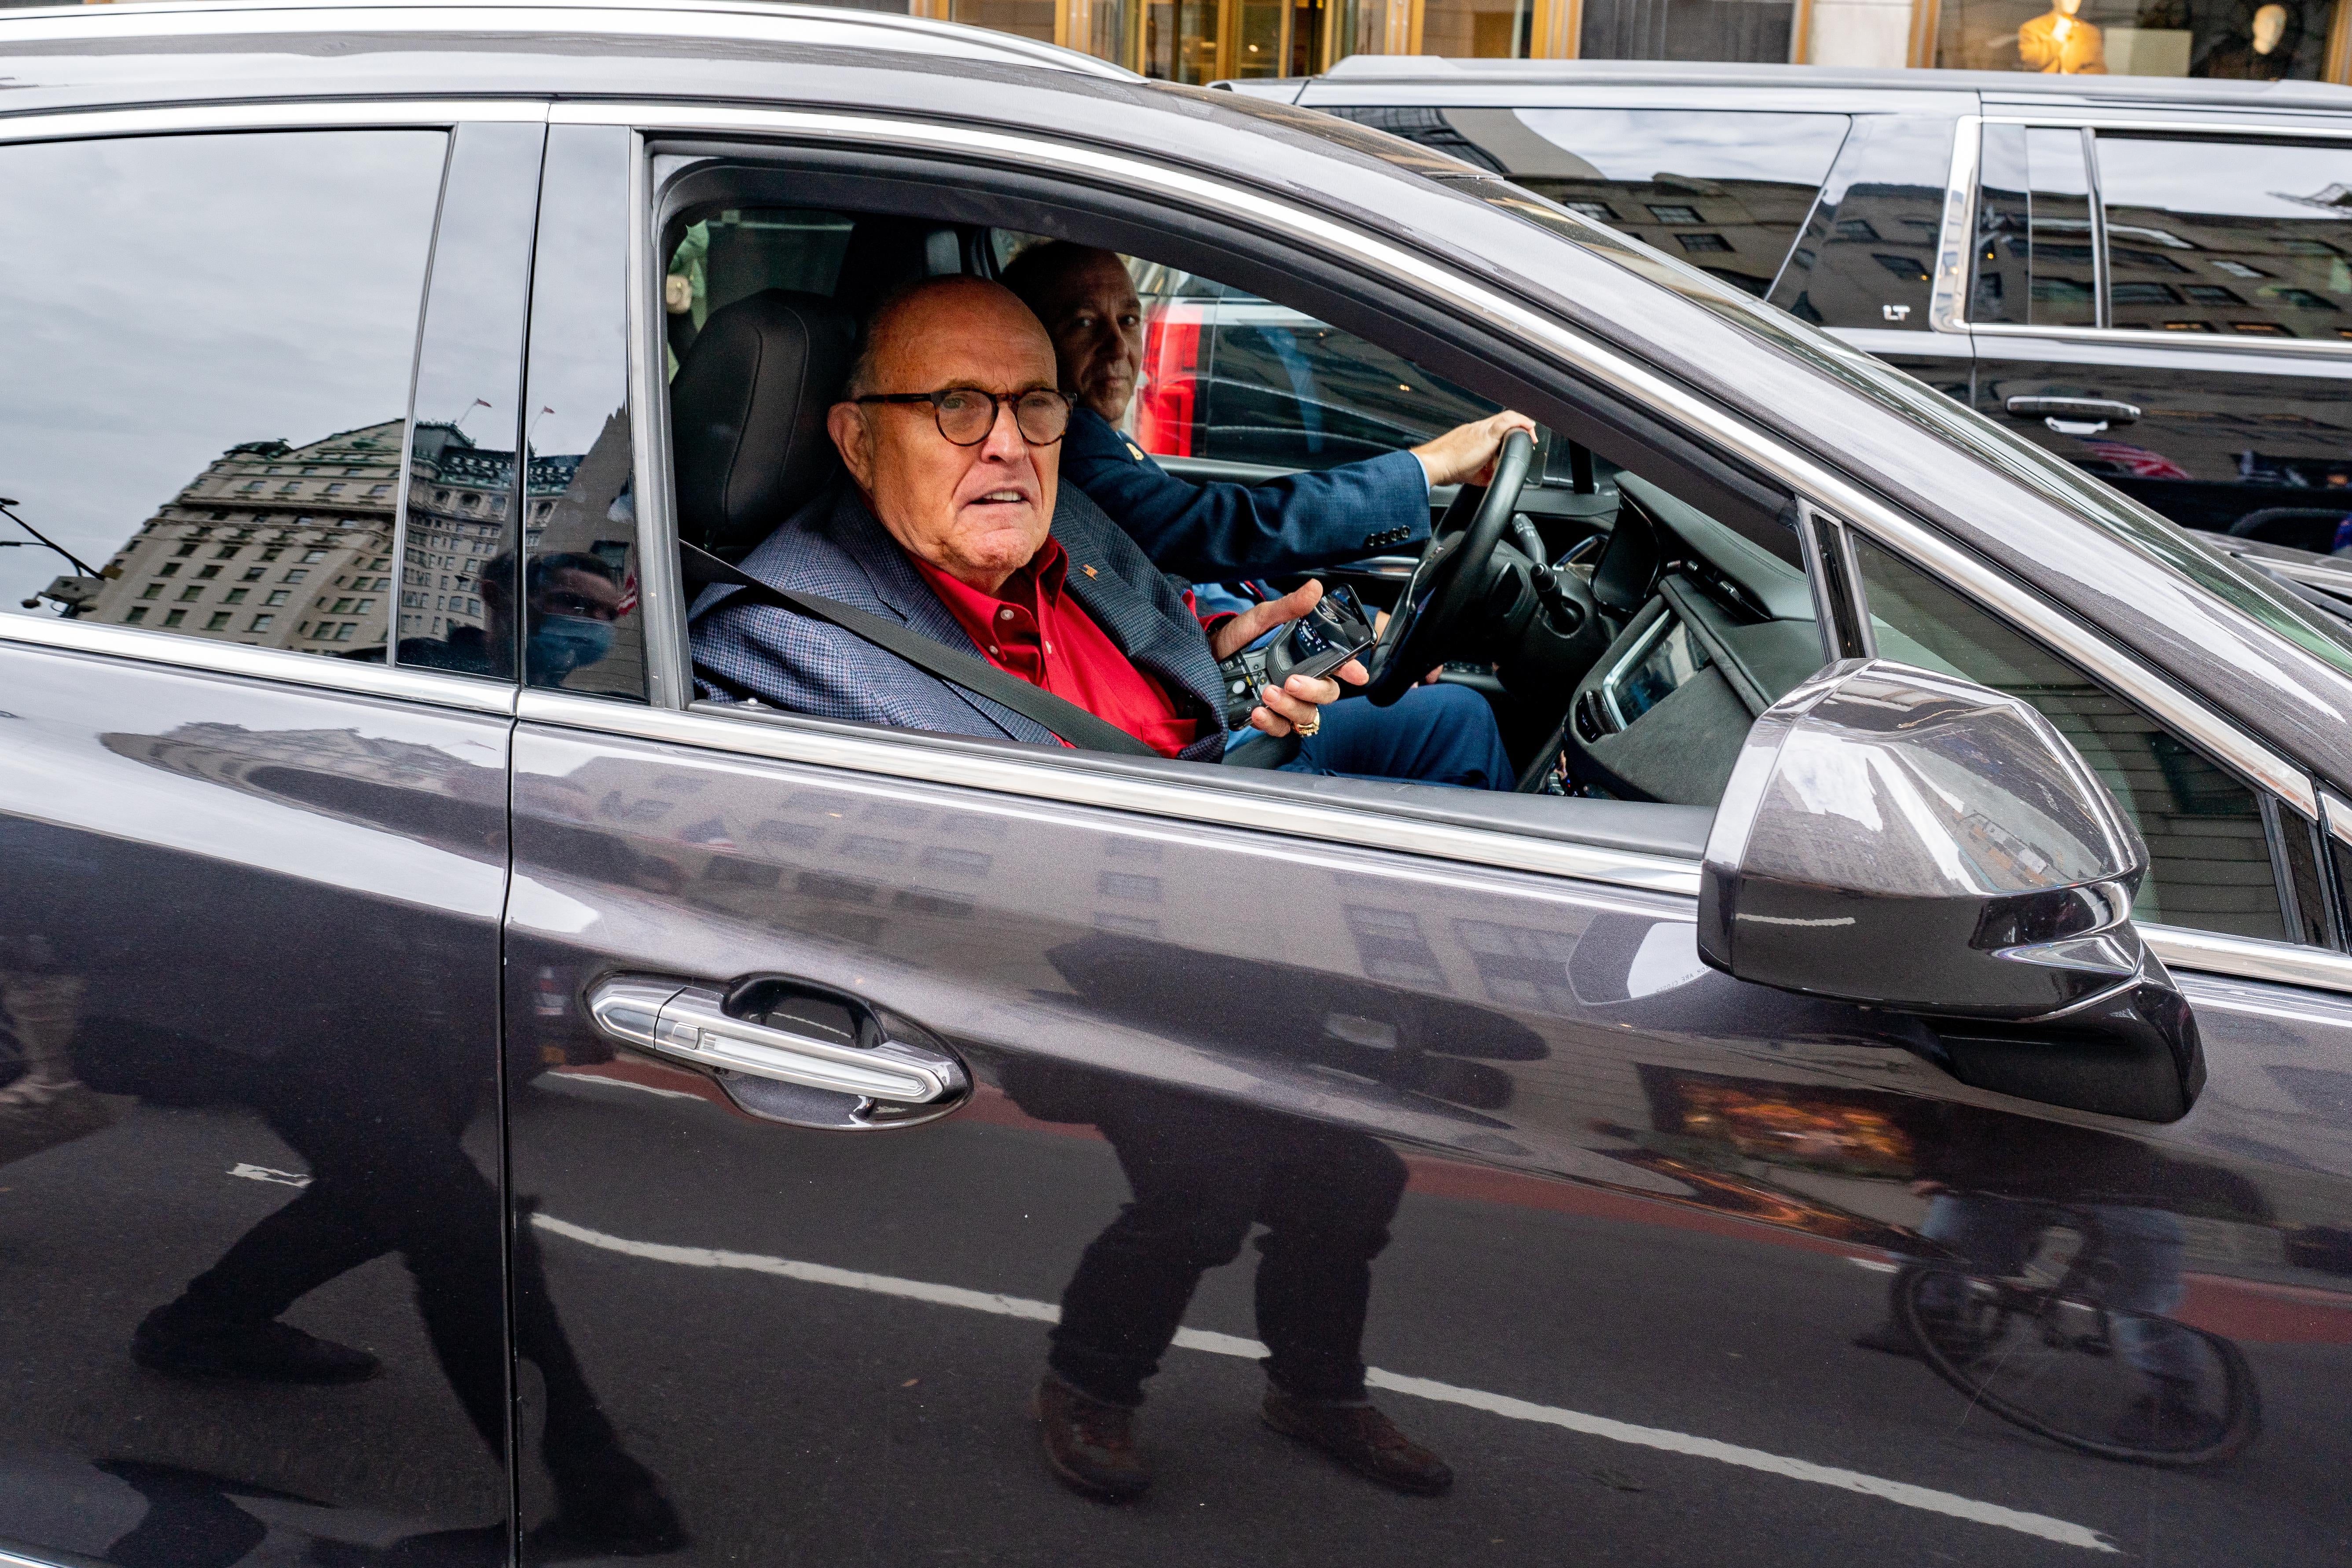 Giuliani holds his phone, sitting in the passenger seat of a black car